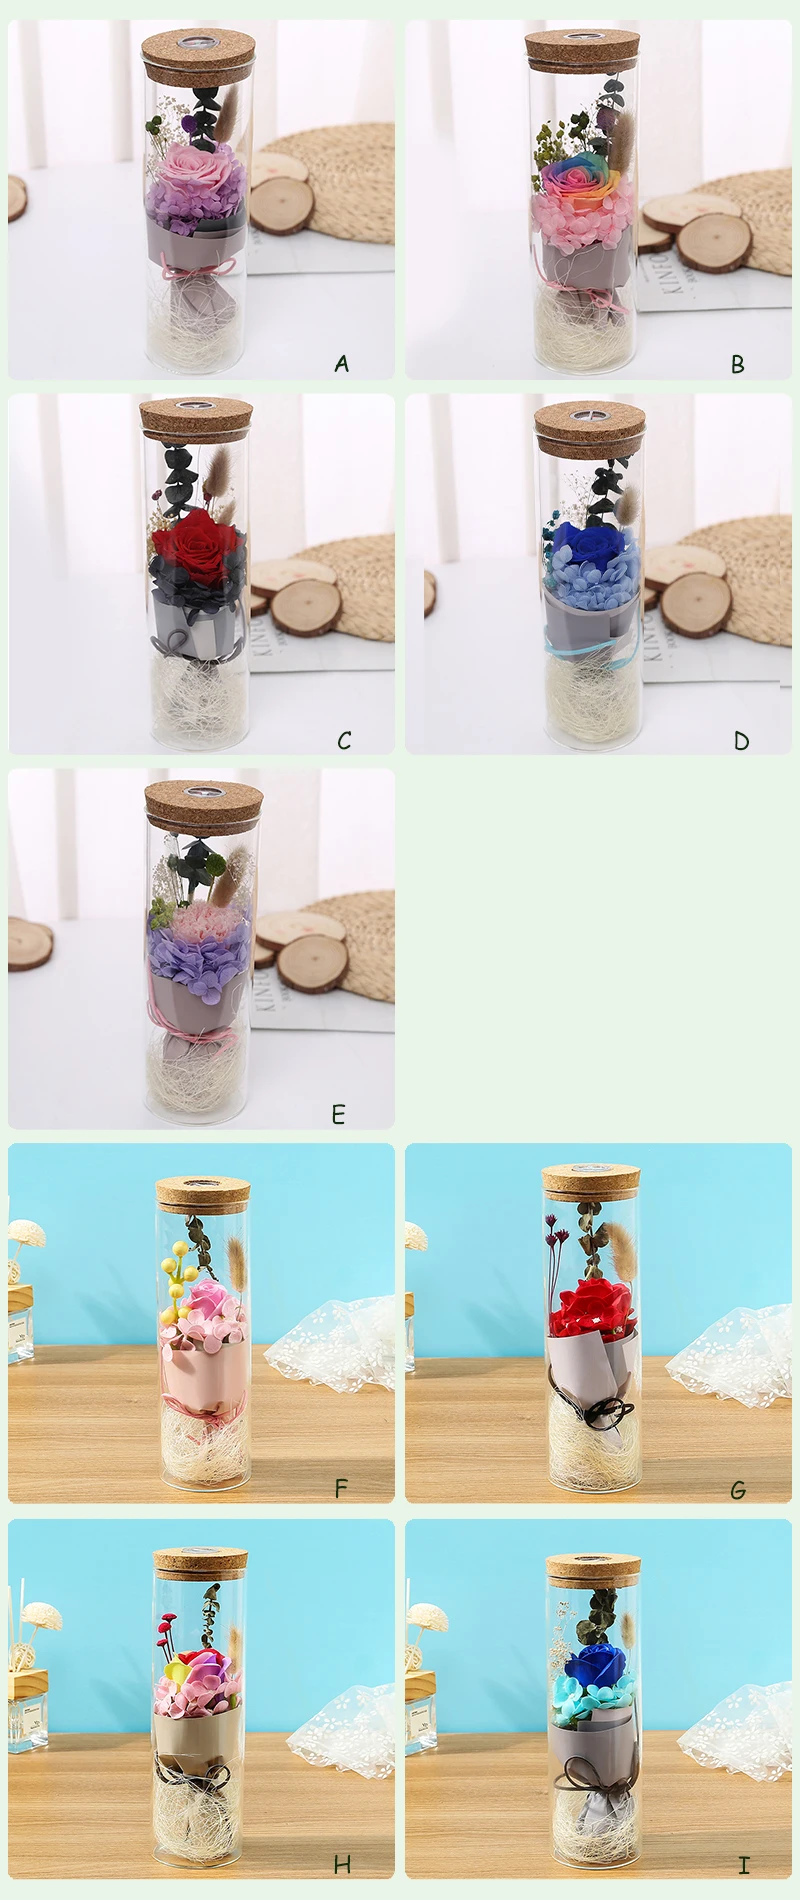 JAROWN Everlasting Flower Wishing Bottle Soap Rose Colorful Glowing Creative Glass Bottle Christmas Gift Wedding Party Decor (30)